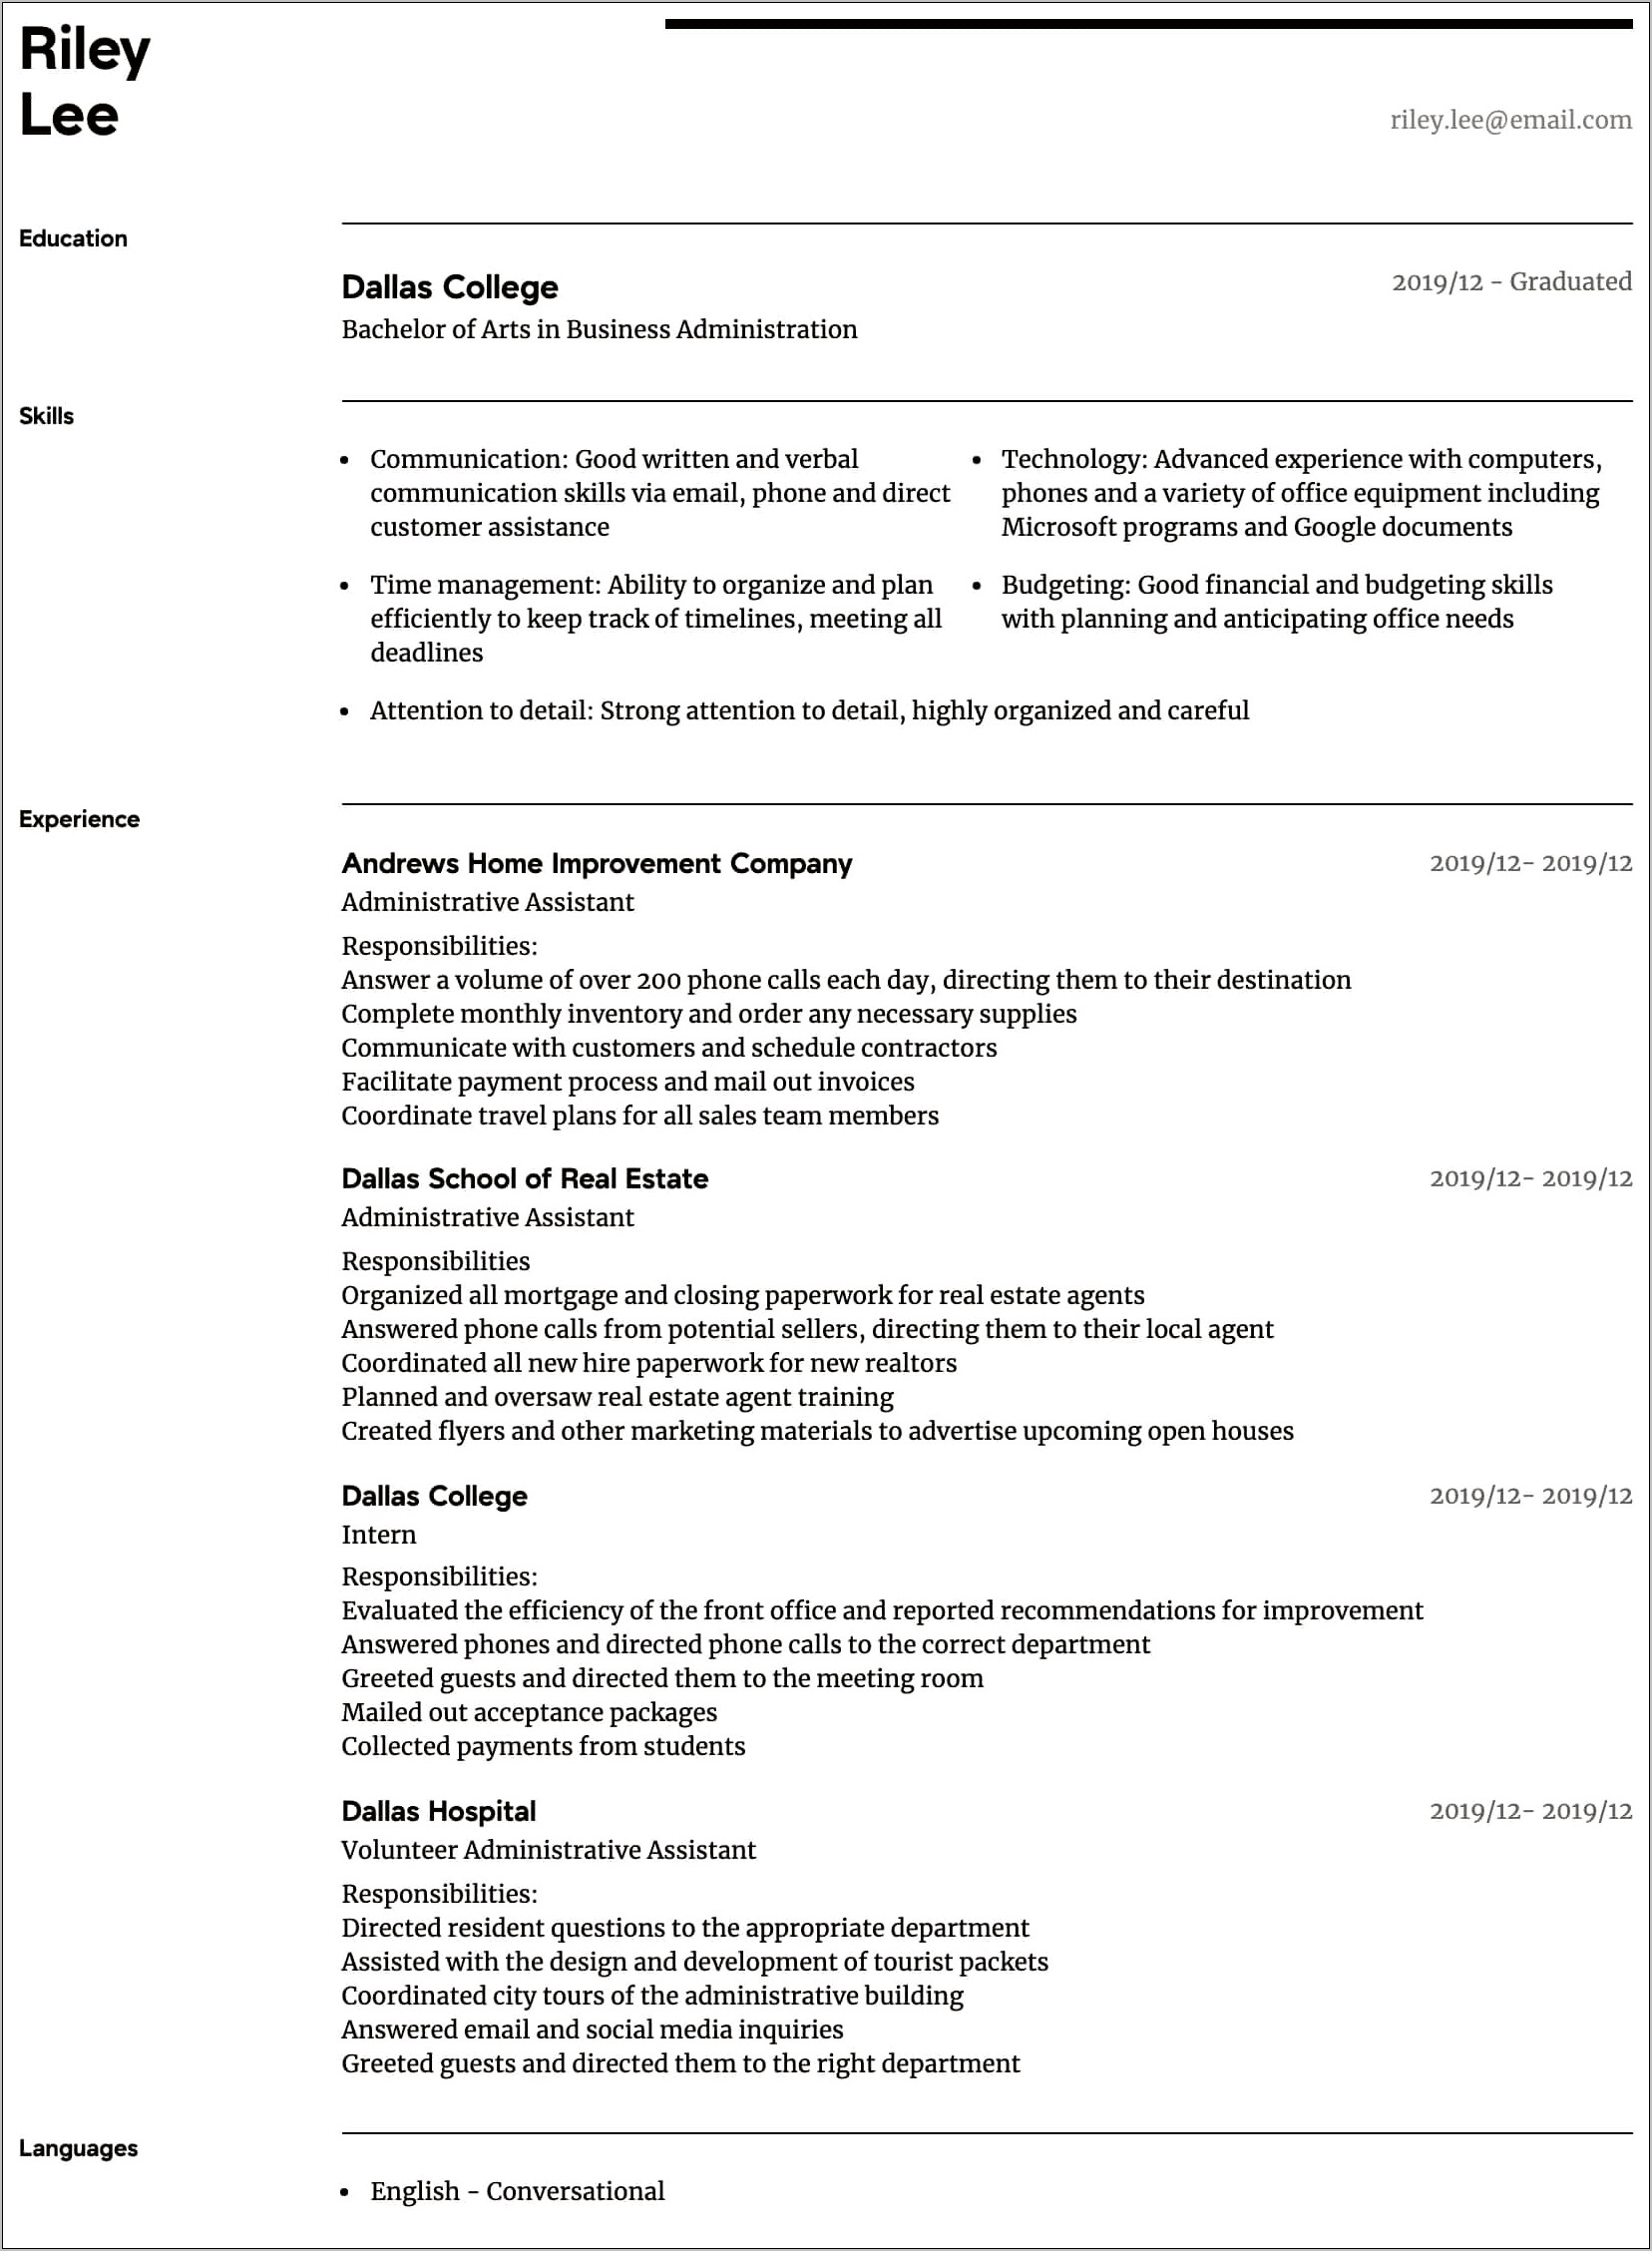 Experienced Executive Assistant Resume Objective